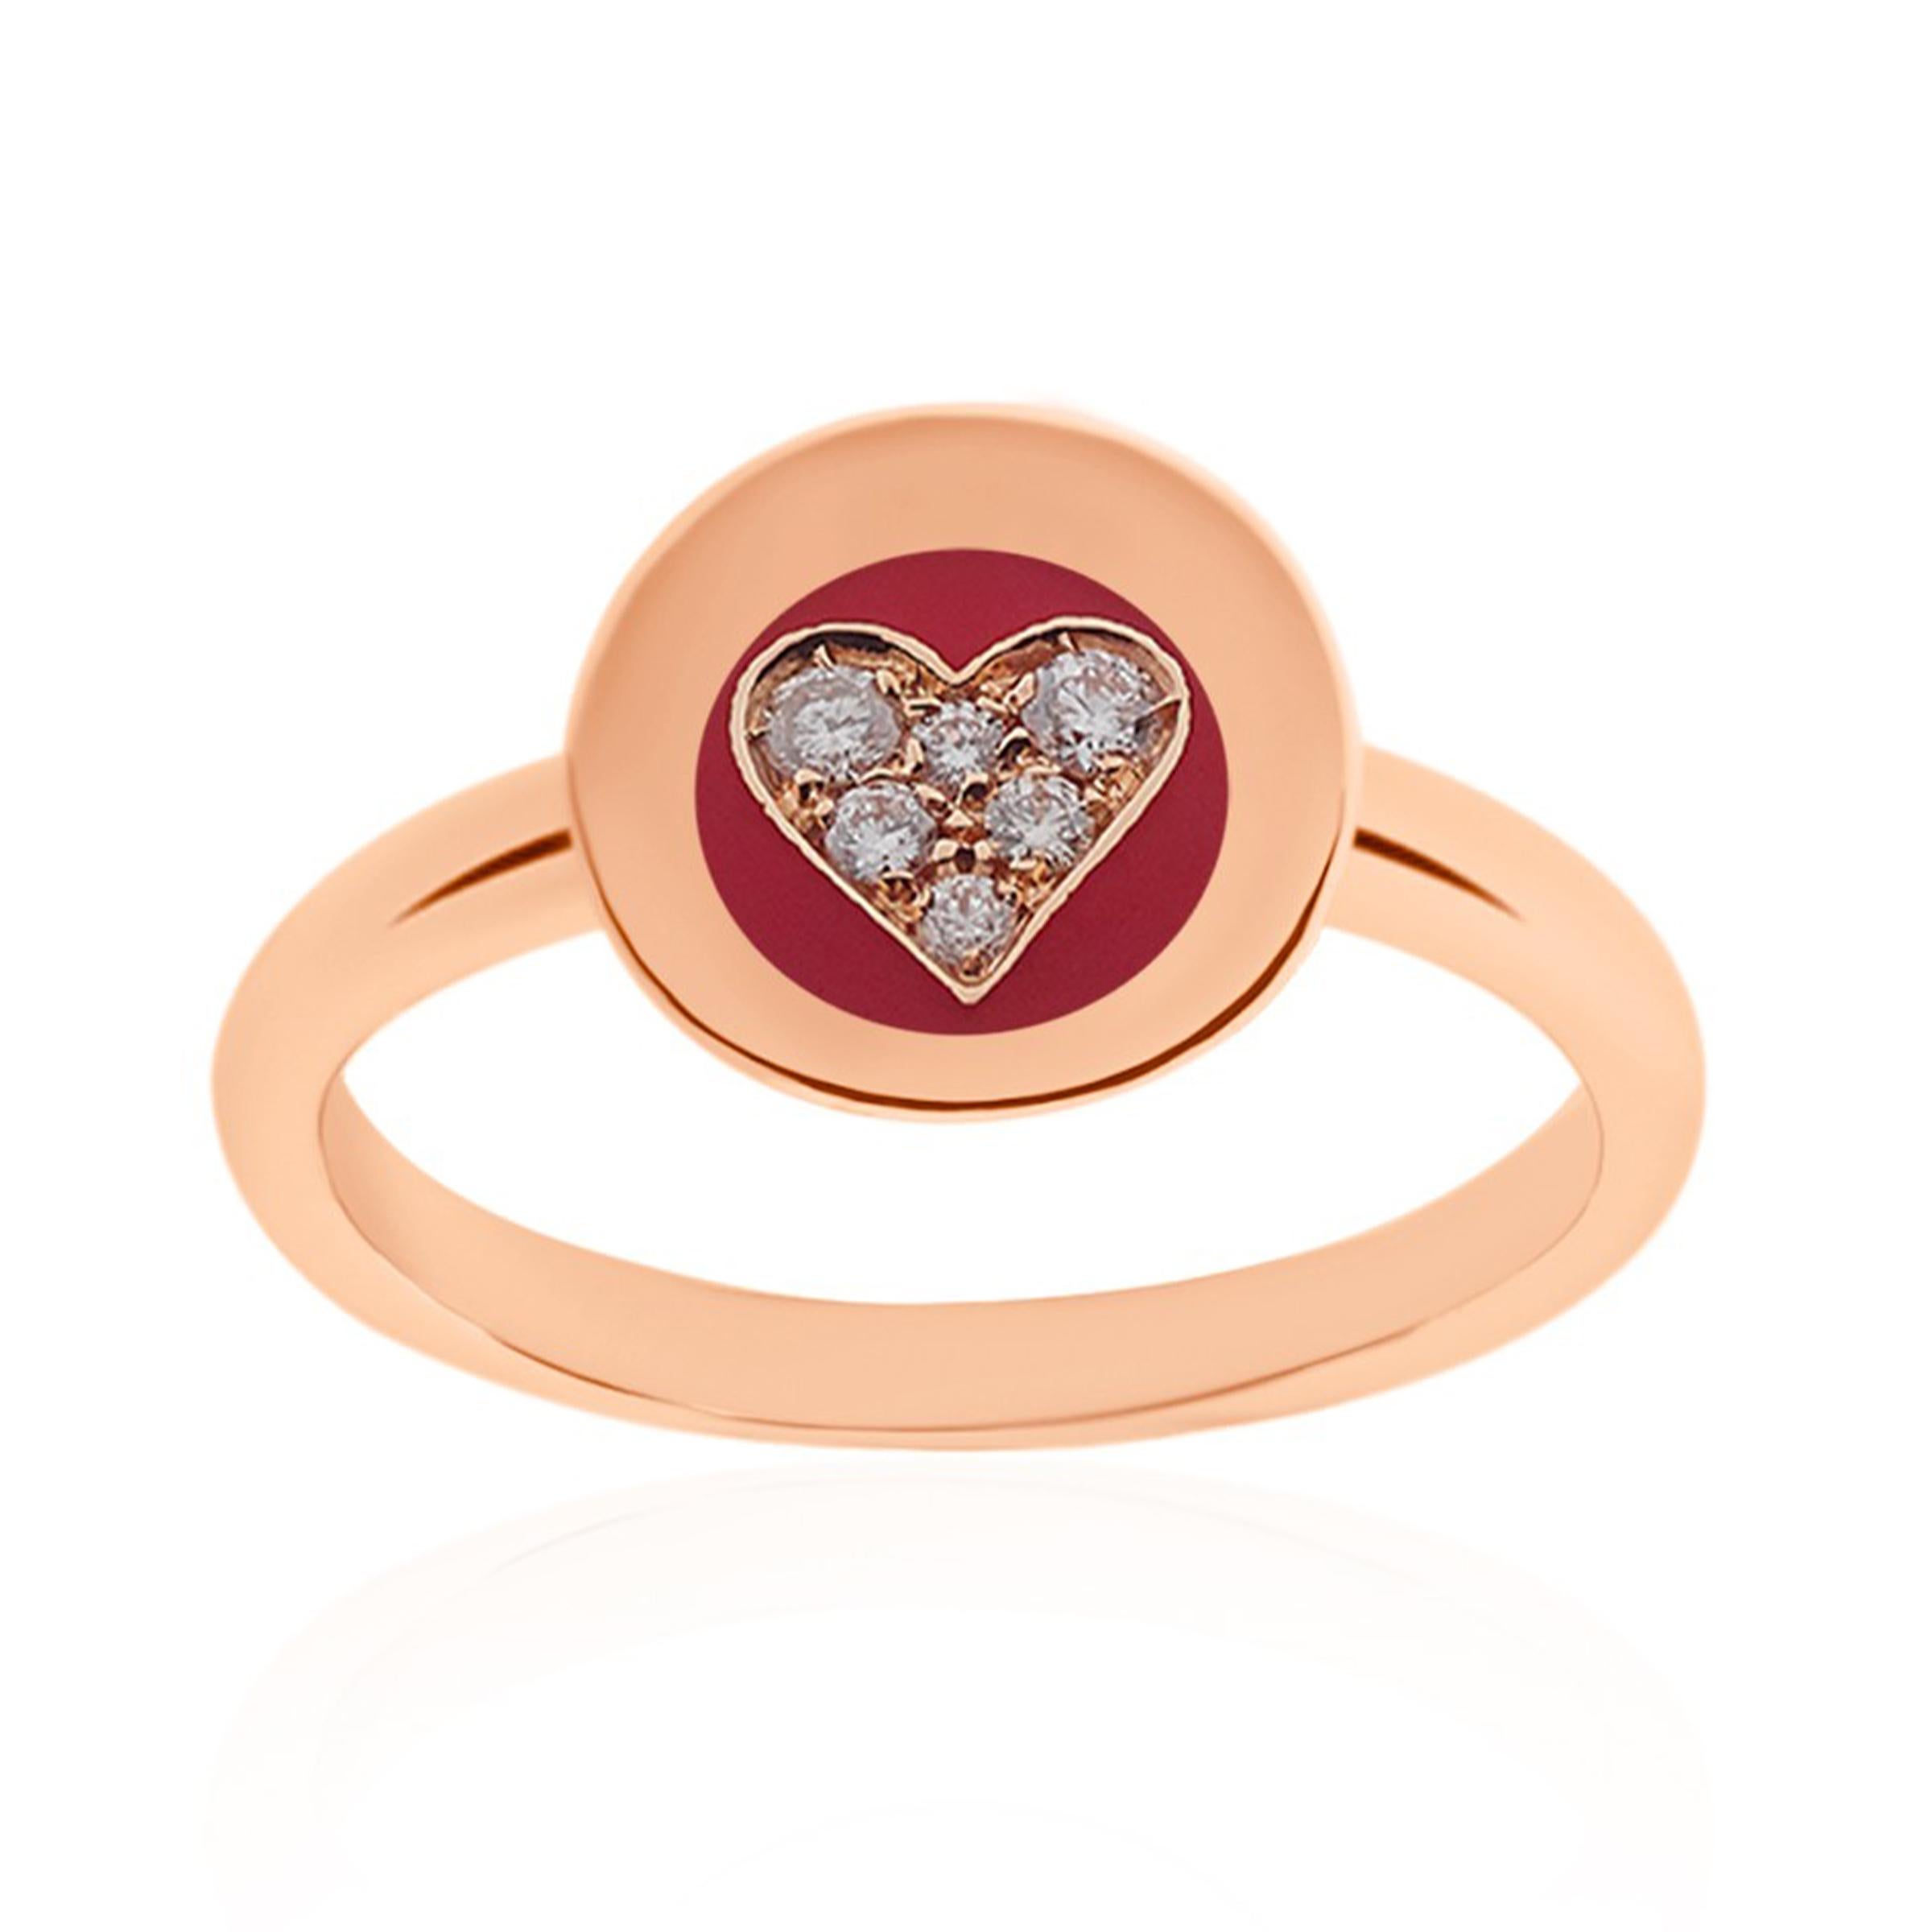 Love ring created from The Dreambox collection in rose gold 18k with enamel and white diamonds. The ring is available with different enamel colors upon request. 
